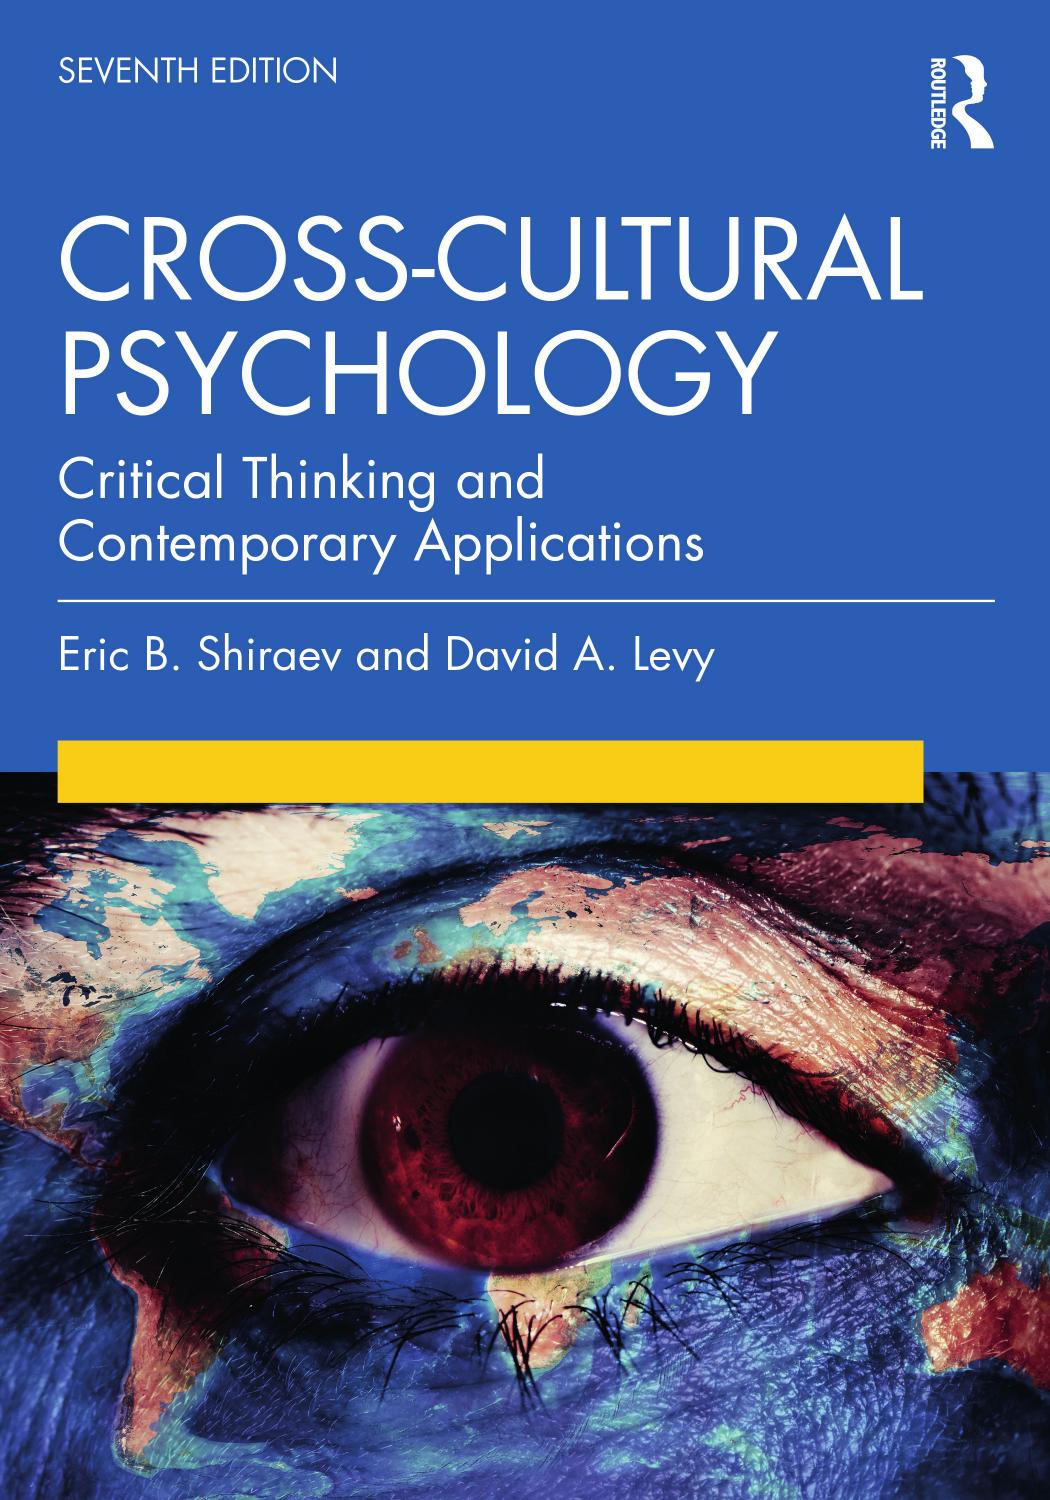 (eBook PDF)Cross-Cultural Psychology: Critical Thinking and Contemporary Applications 7th Edition by Eric B. Shiraev,David A. Levy